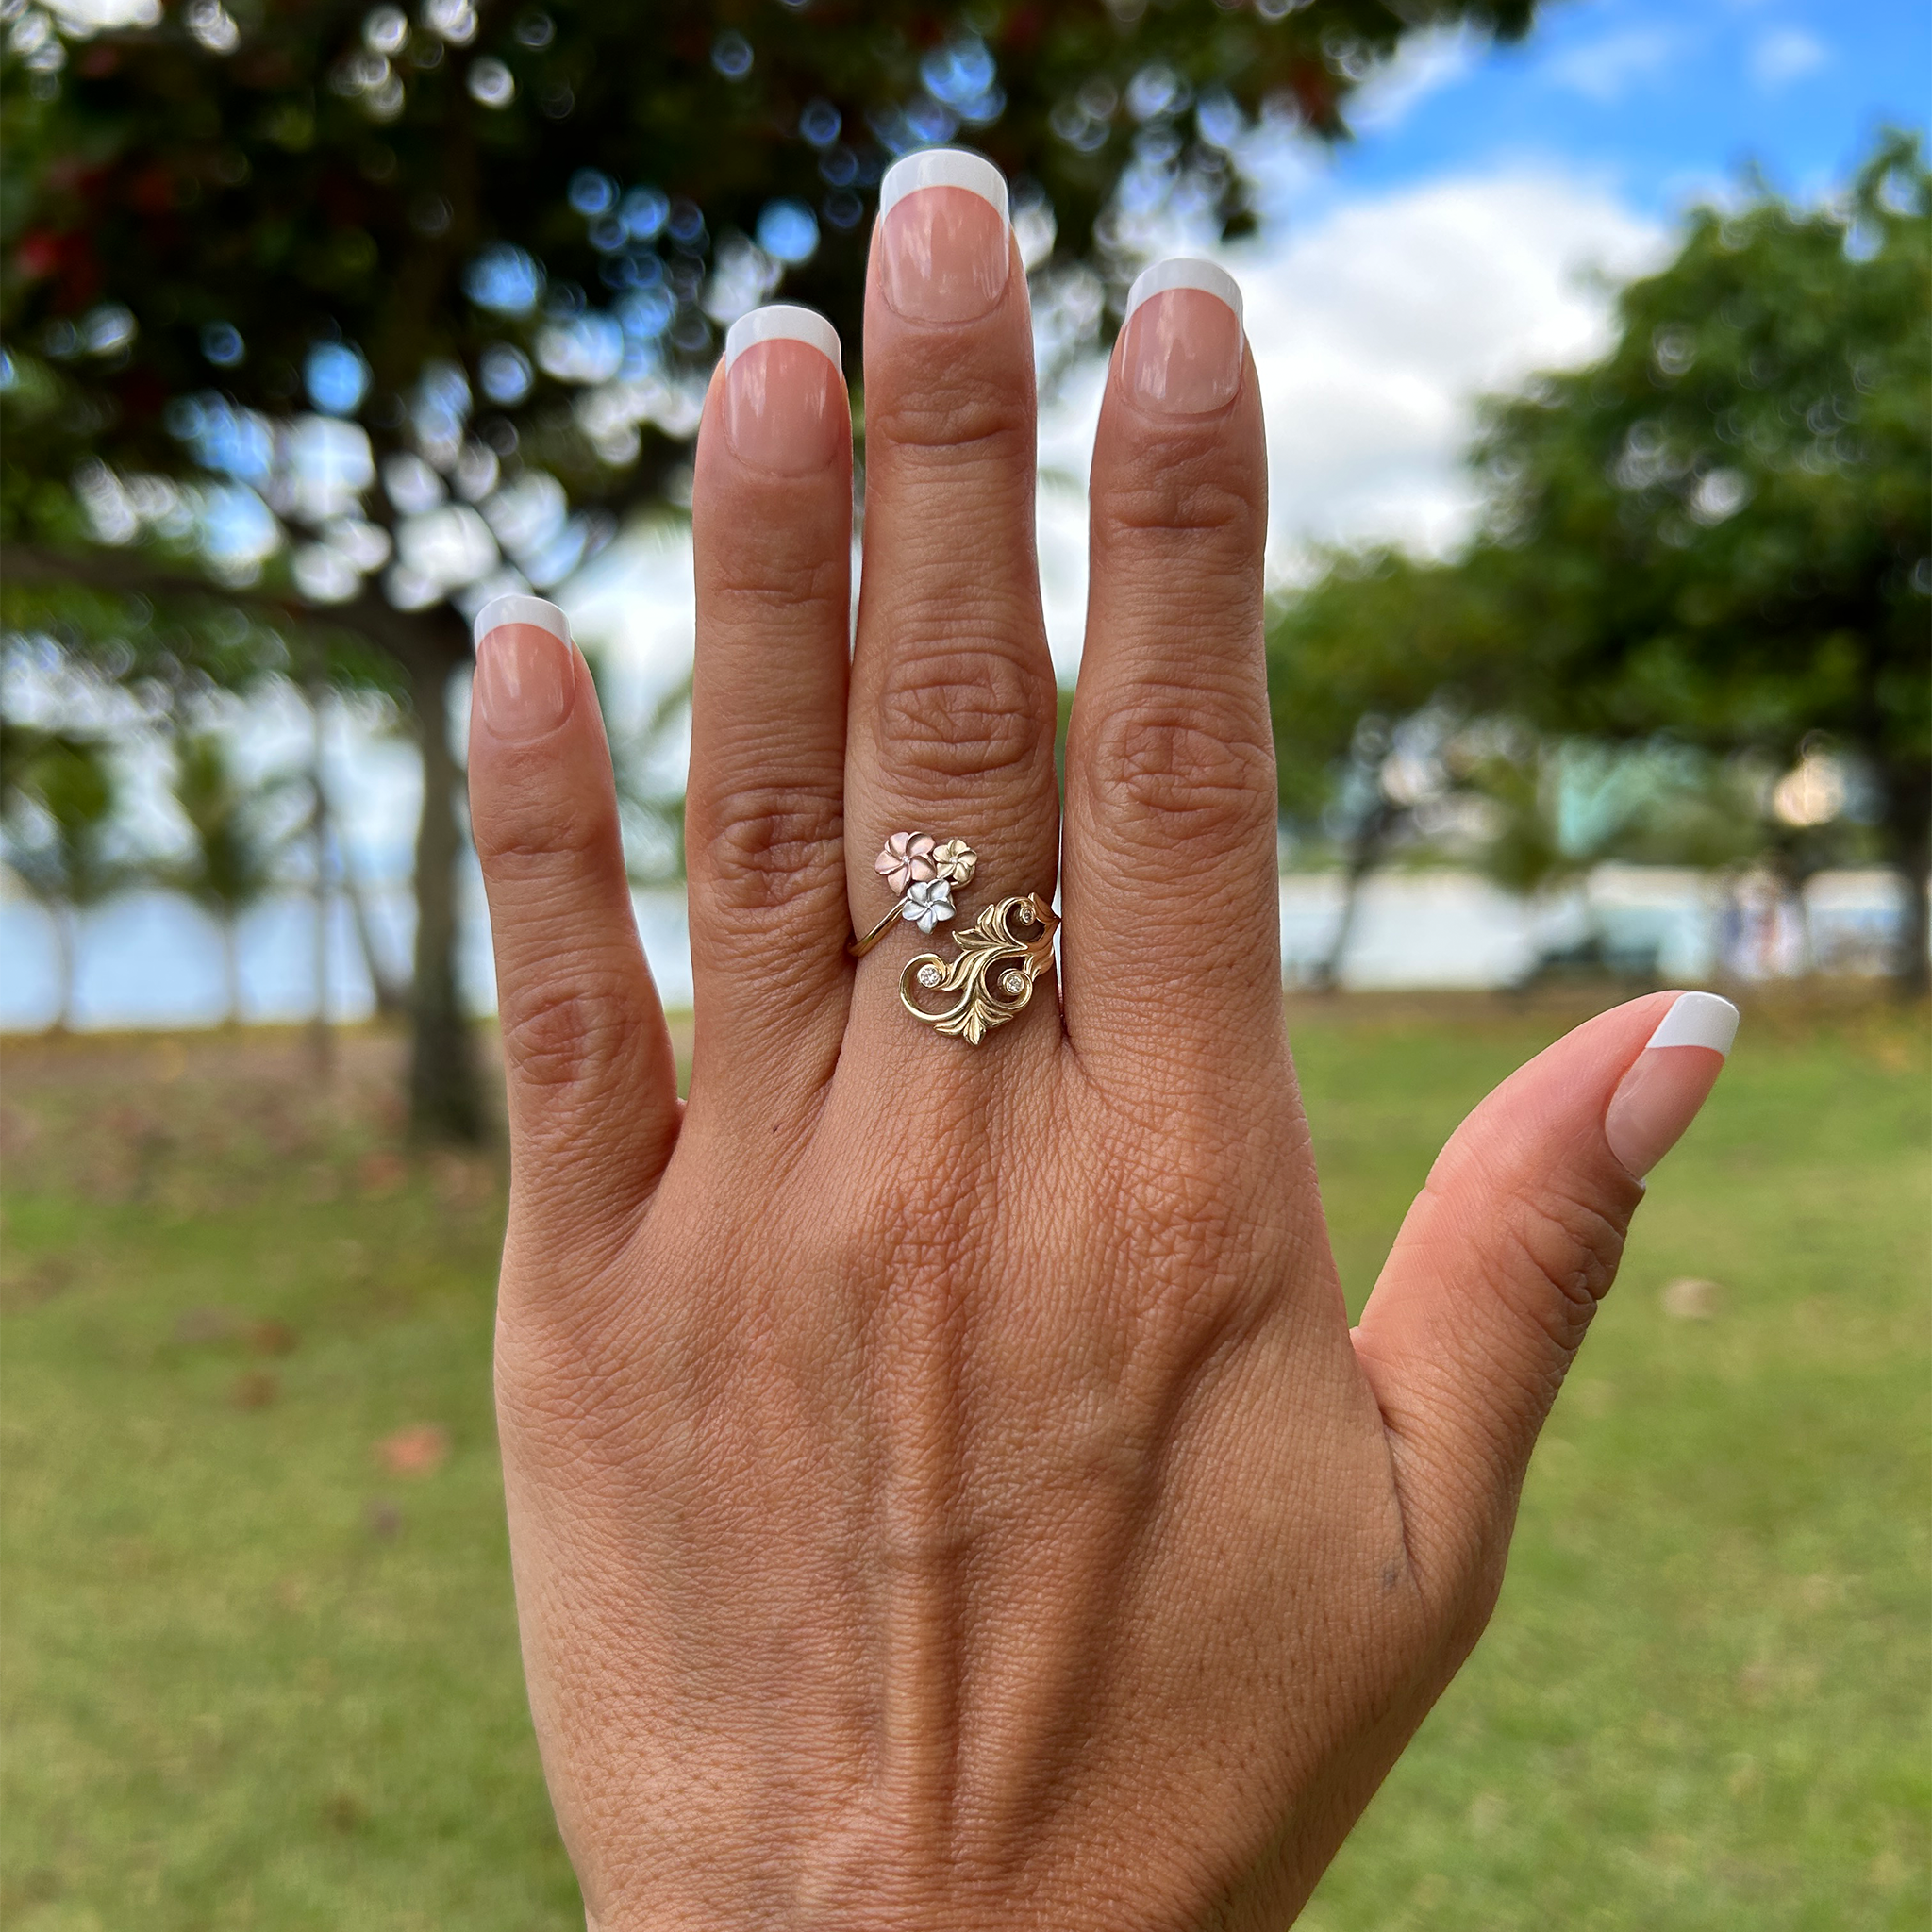 A woman's hand wearing a Living Heirloom Plumeria Ring in Tri Color Gold with Diamonds - Maui Divers Jewelry